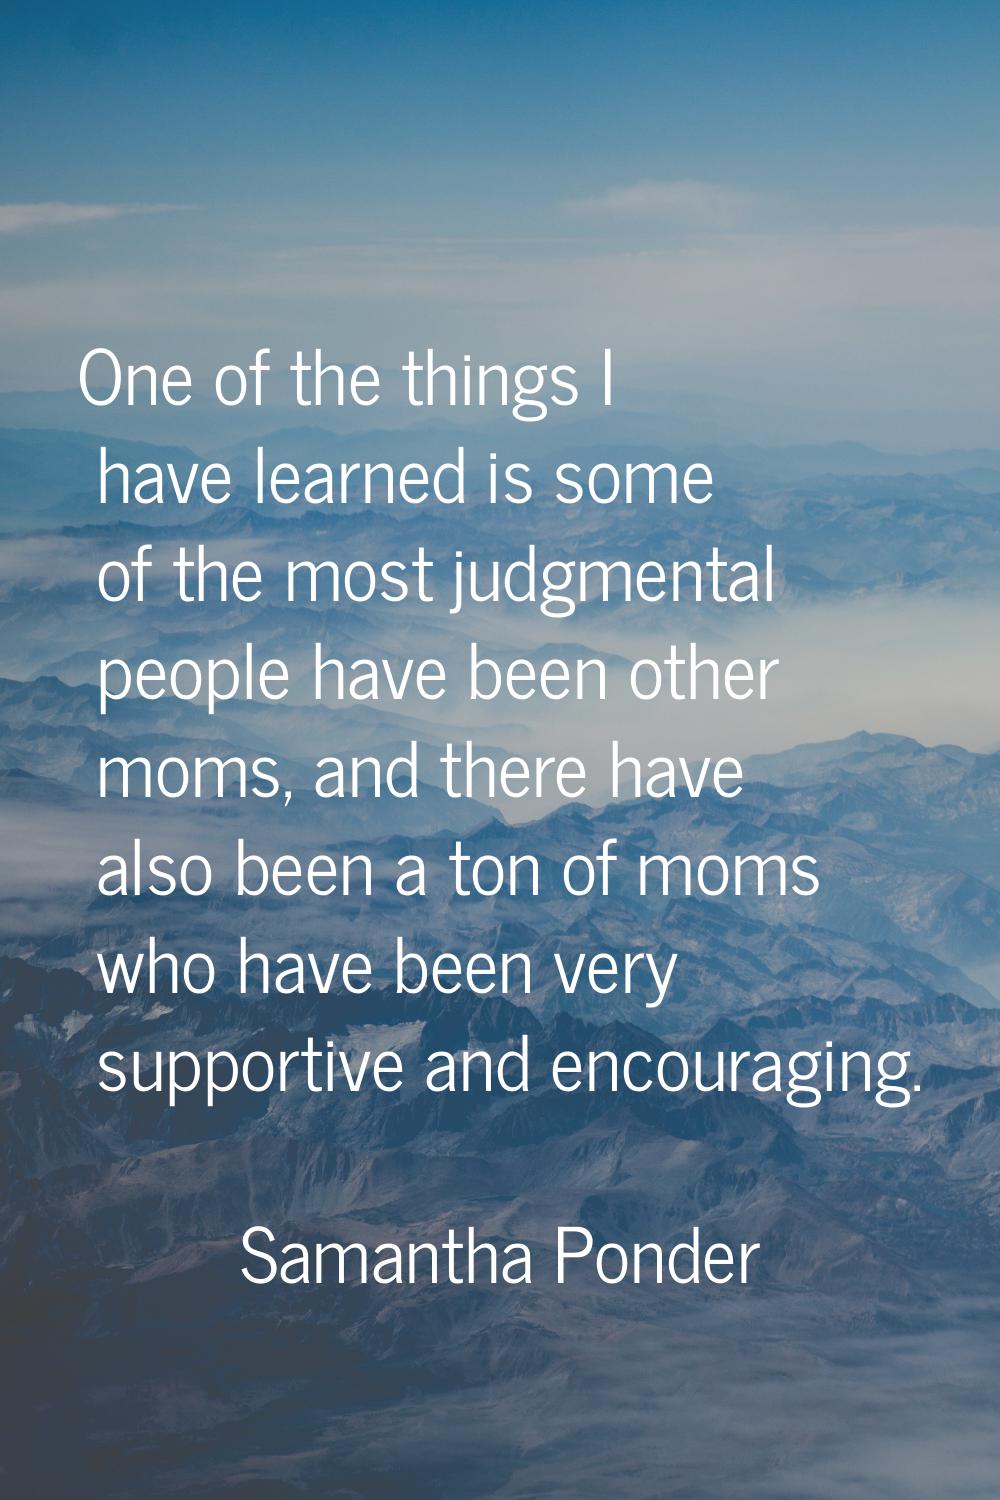 One of the things I have learned is some of the most judgmental people have been other moms, and th